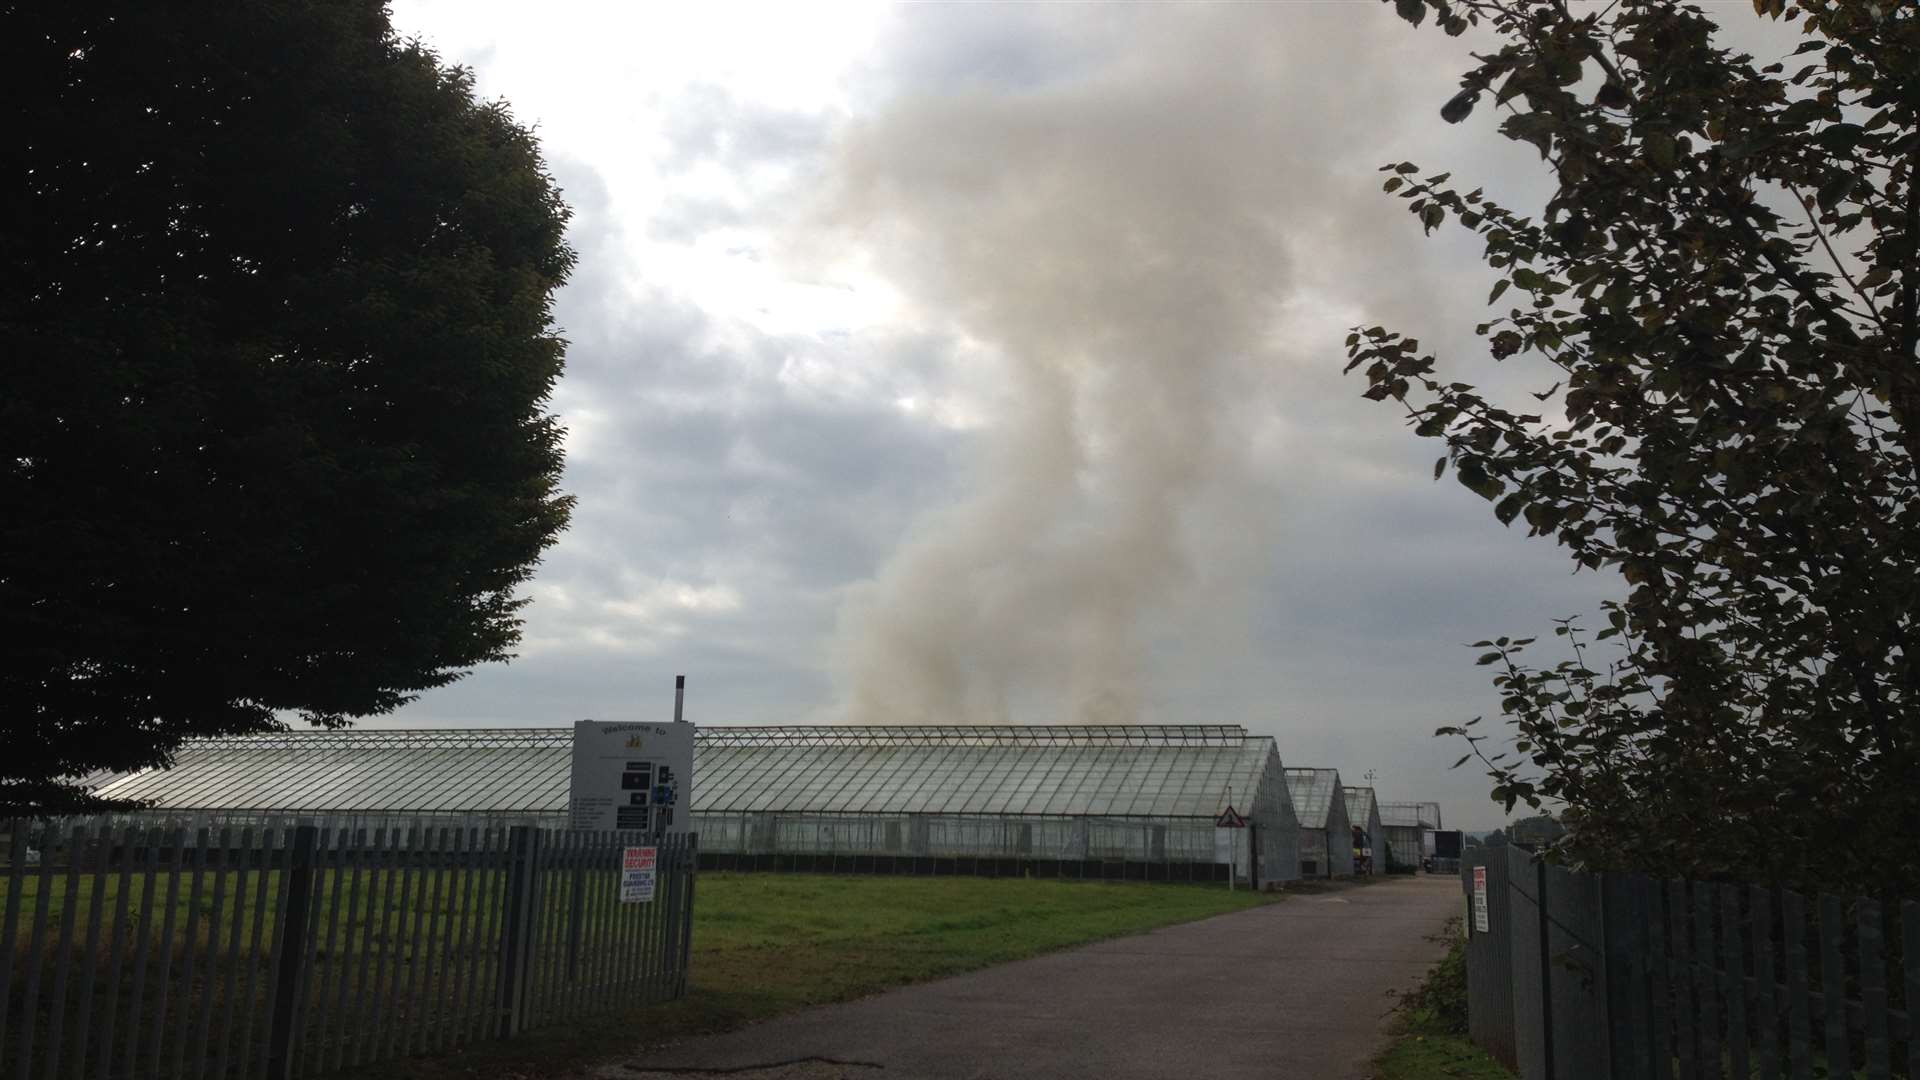 Smoke seen billowing from the greenhouse in Hadlow